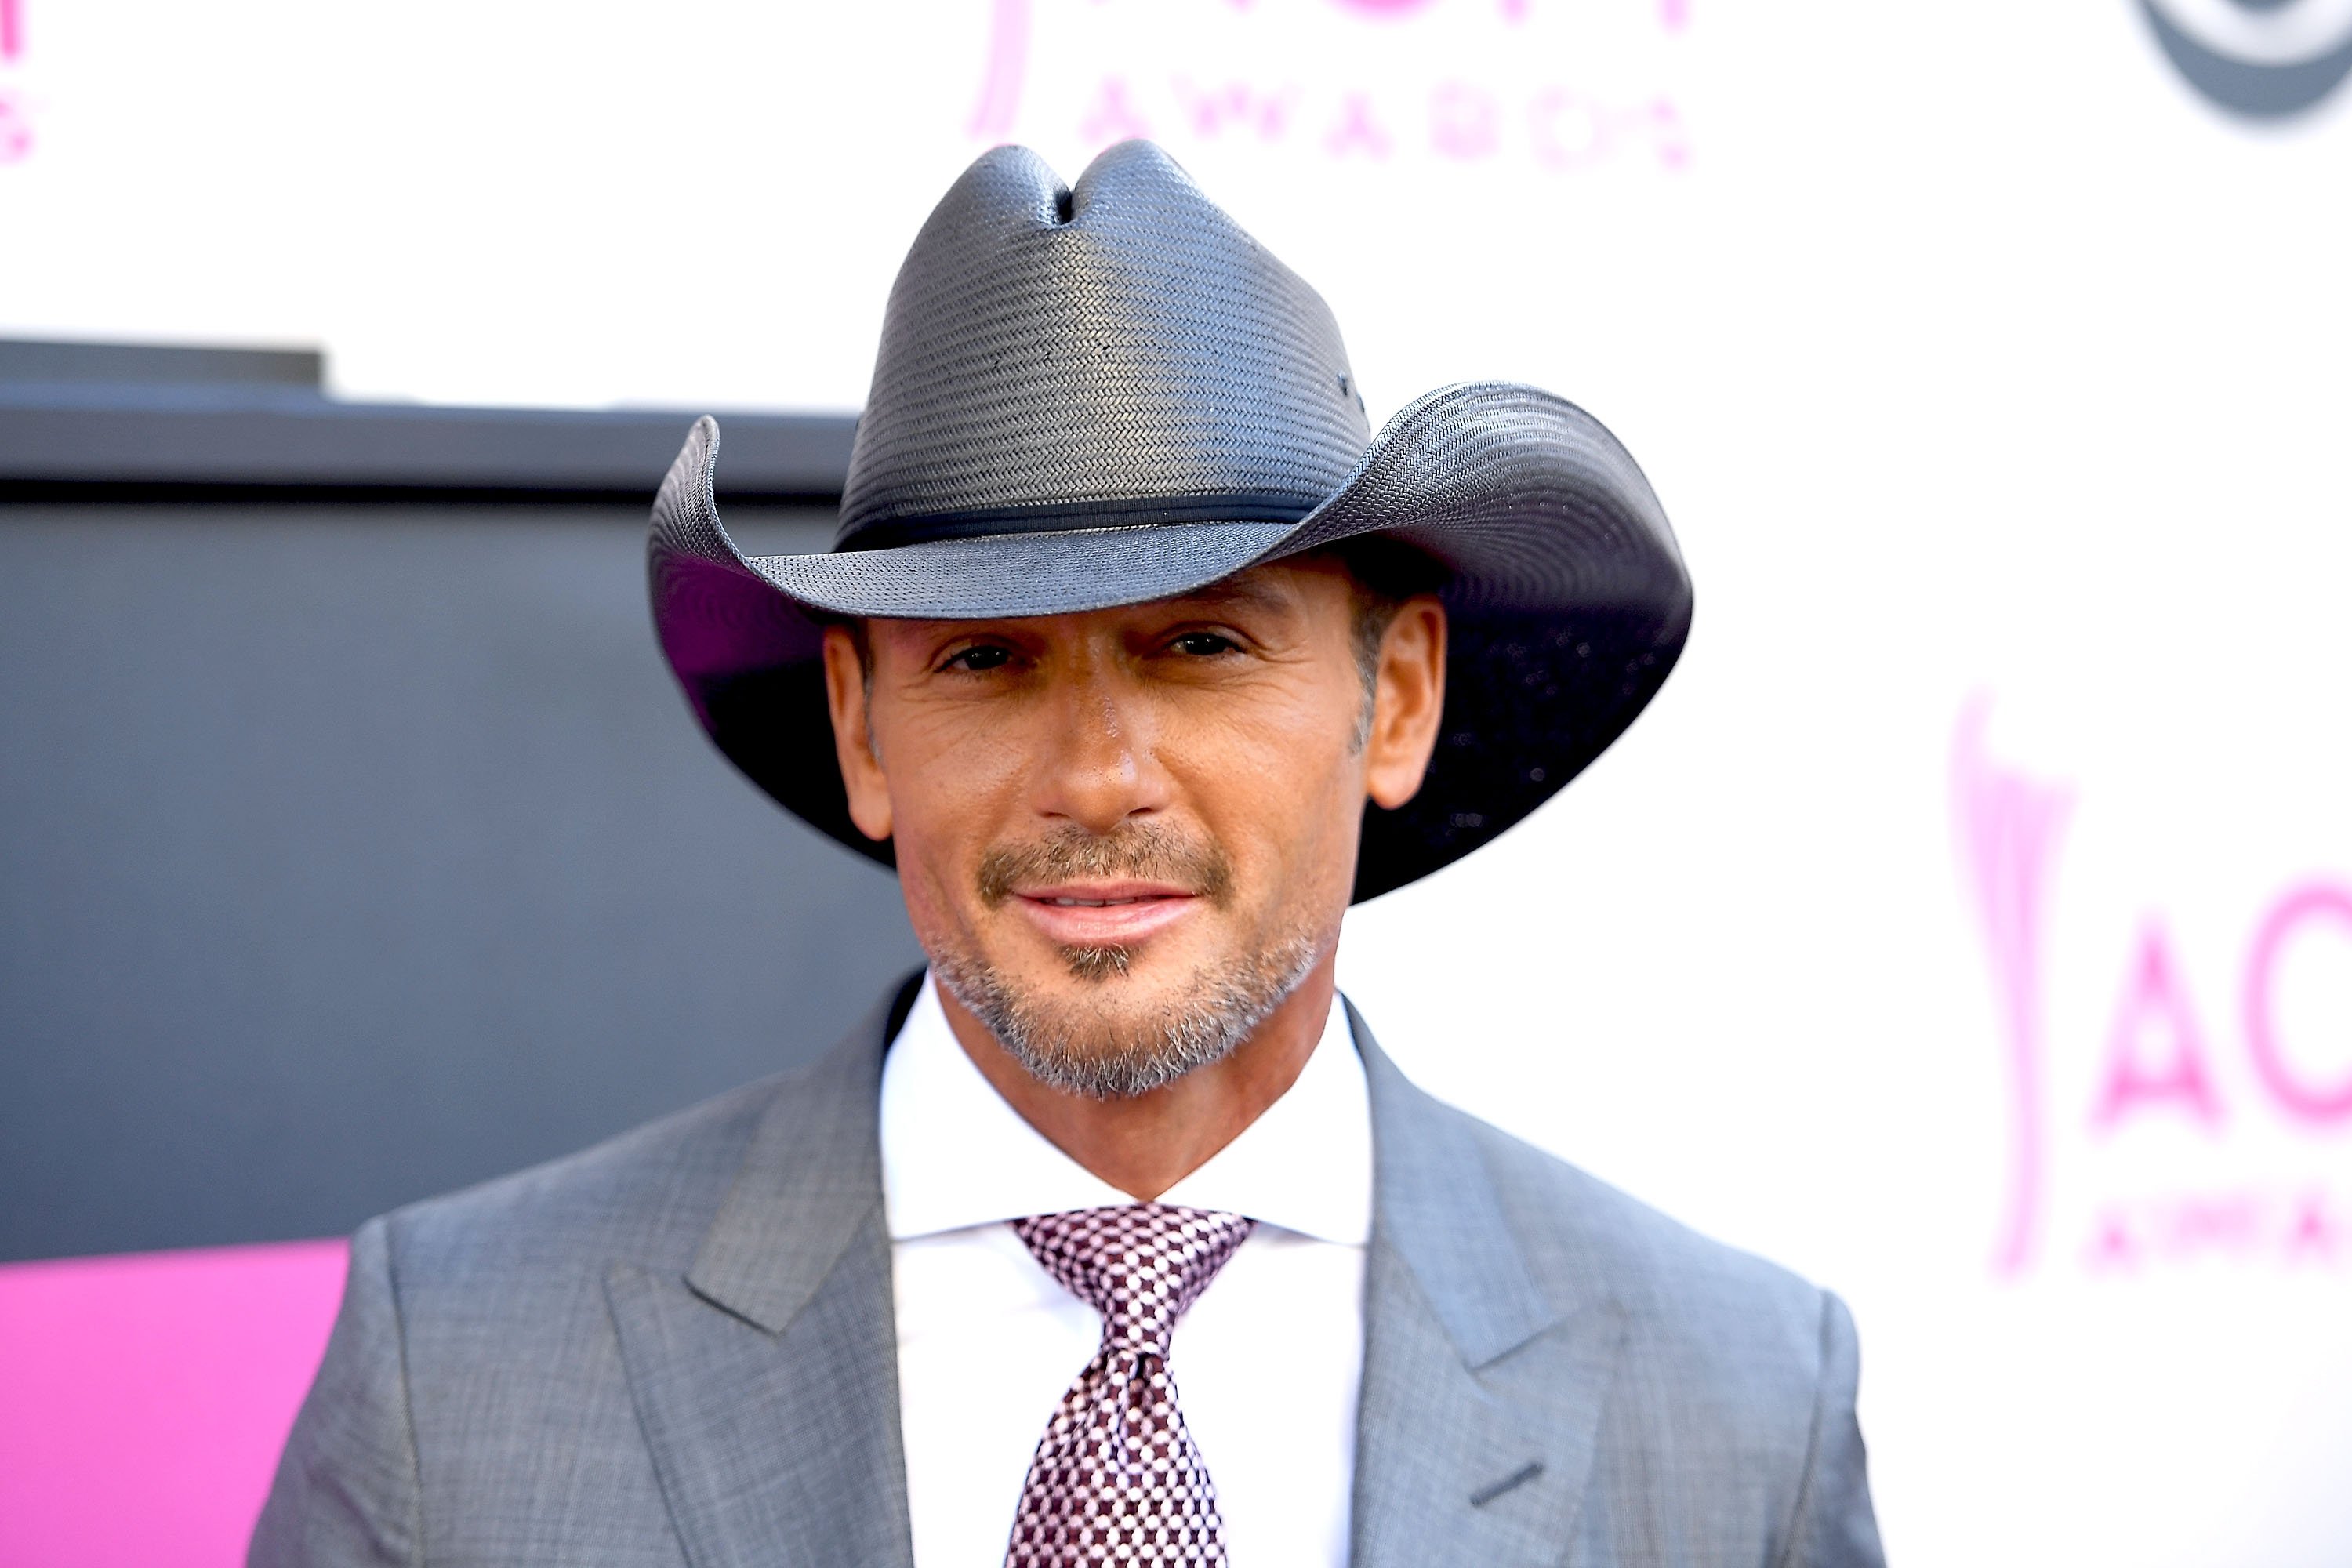 Tim McGraw attends the 52nd Academy Of Country Music Awards at T-Mobile Arena on April 2, 2017 in Las Vegas, Nevada. | Photo: Getty Images